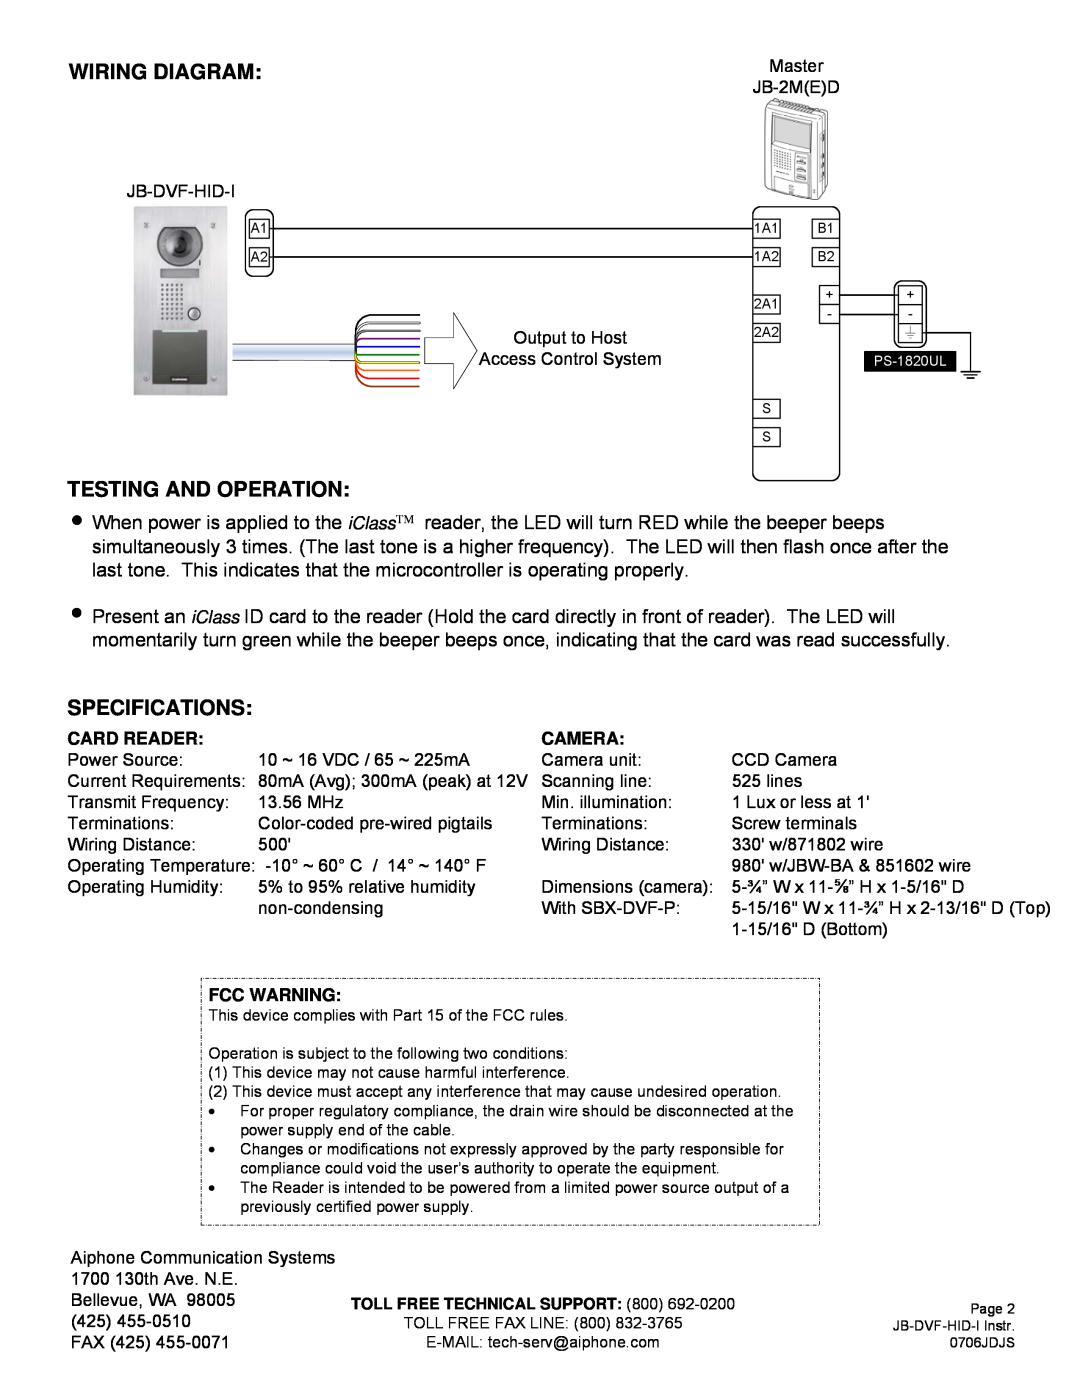 Aiphone JB-DVF-HID-I dimensions Wiring Diagram, Testing And Operation, Specifications, Card Reader, Camera, Fcc Warning 